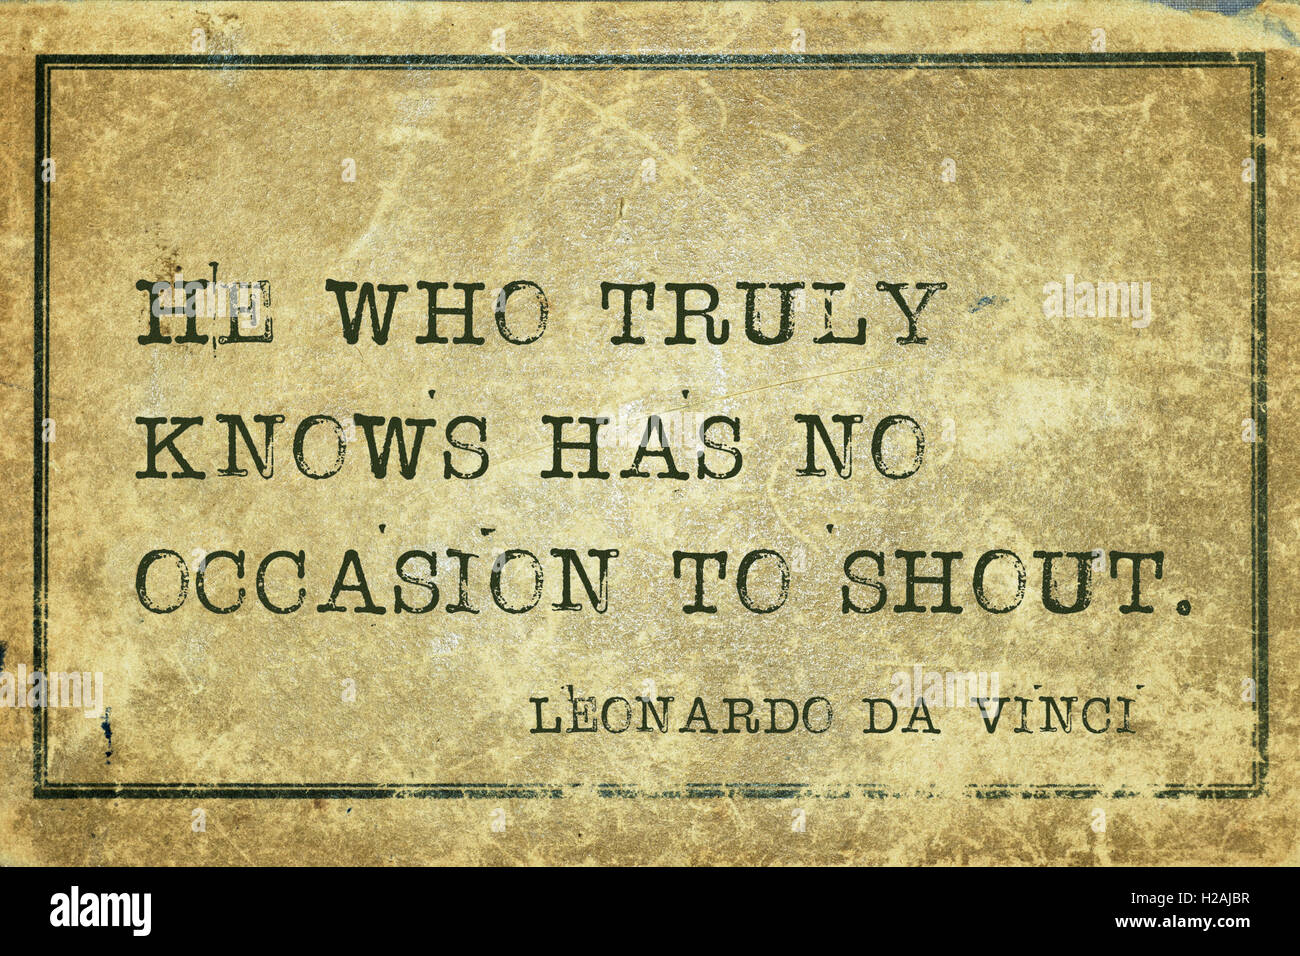 He who truly knows has no occasion - ancient Italian artist Leonardo da Vinci quote printed on grunge vintage cardboard Stock Photo